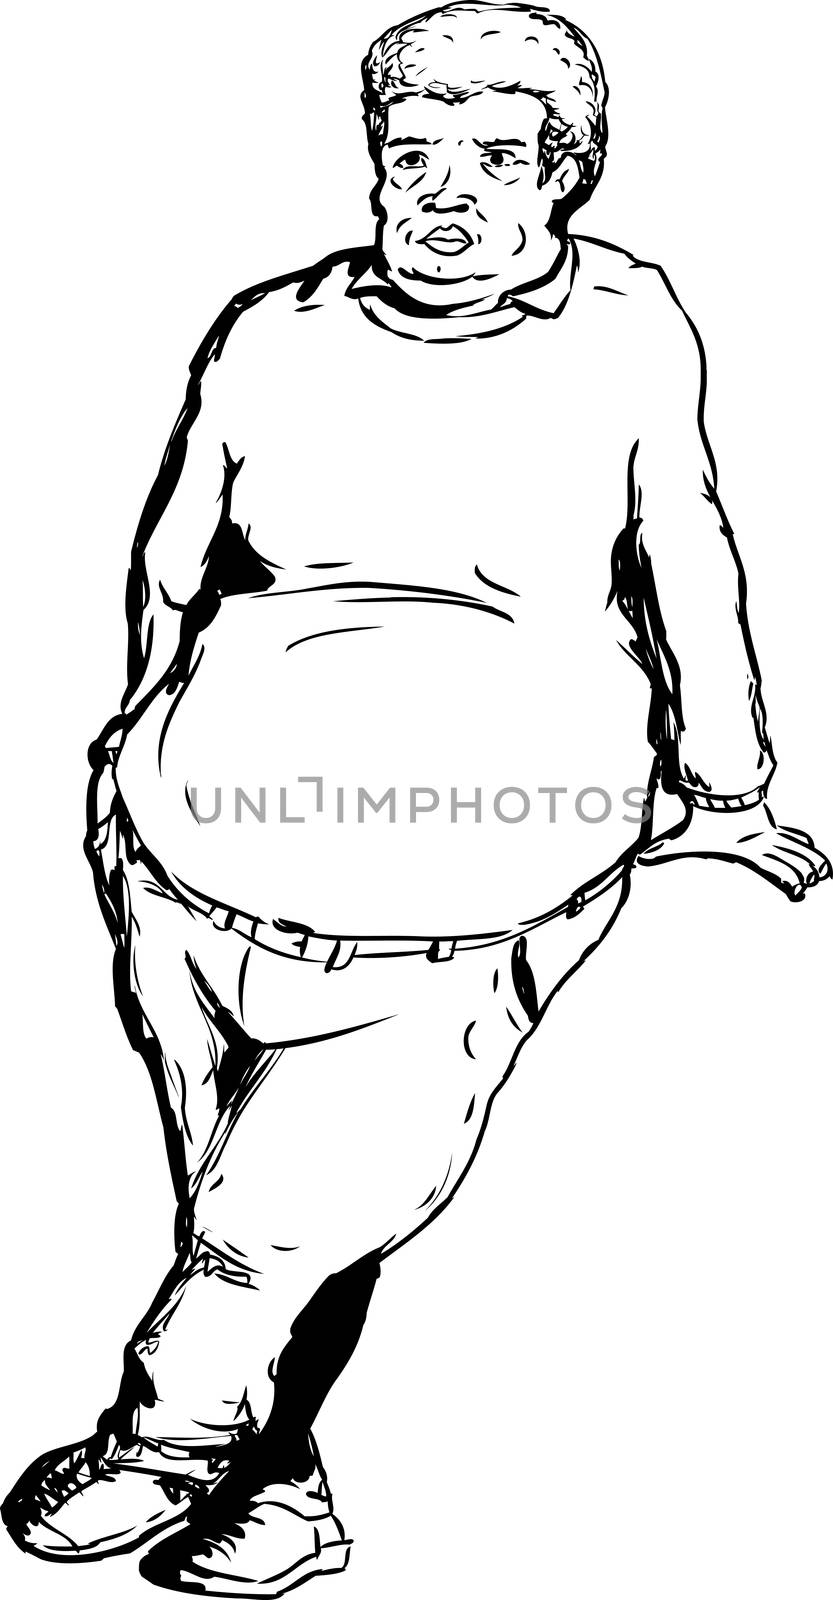 Single outlined overweight man with big belly leaning over blank area